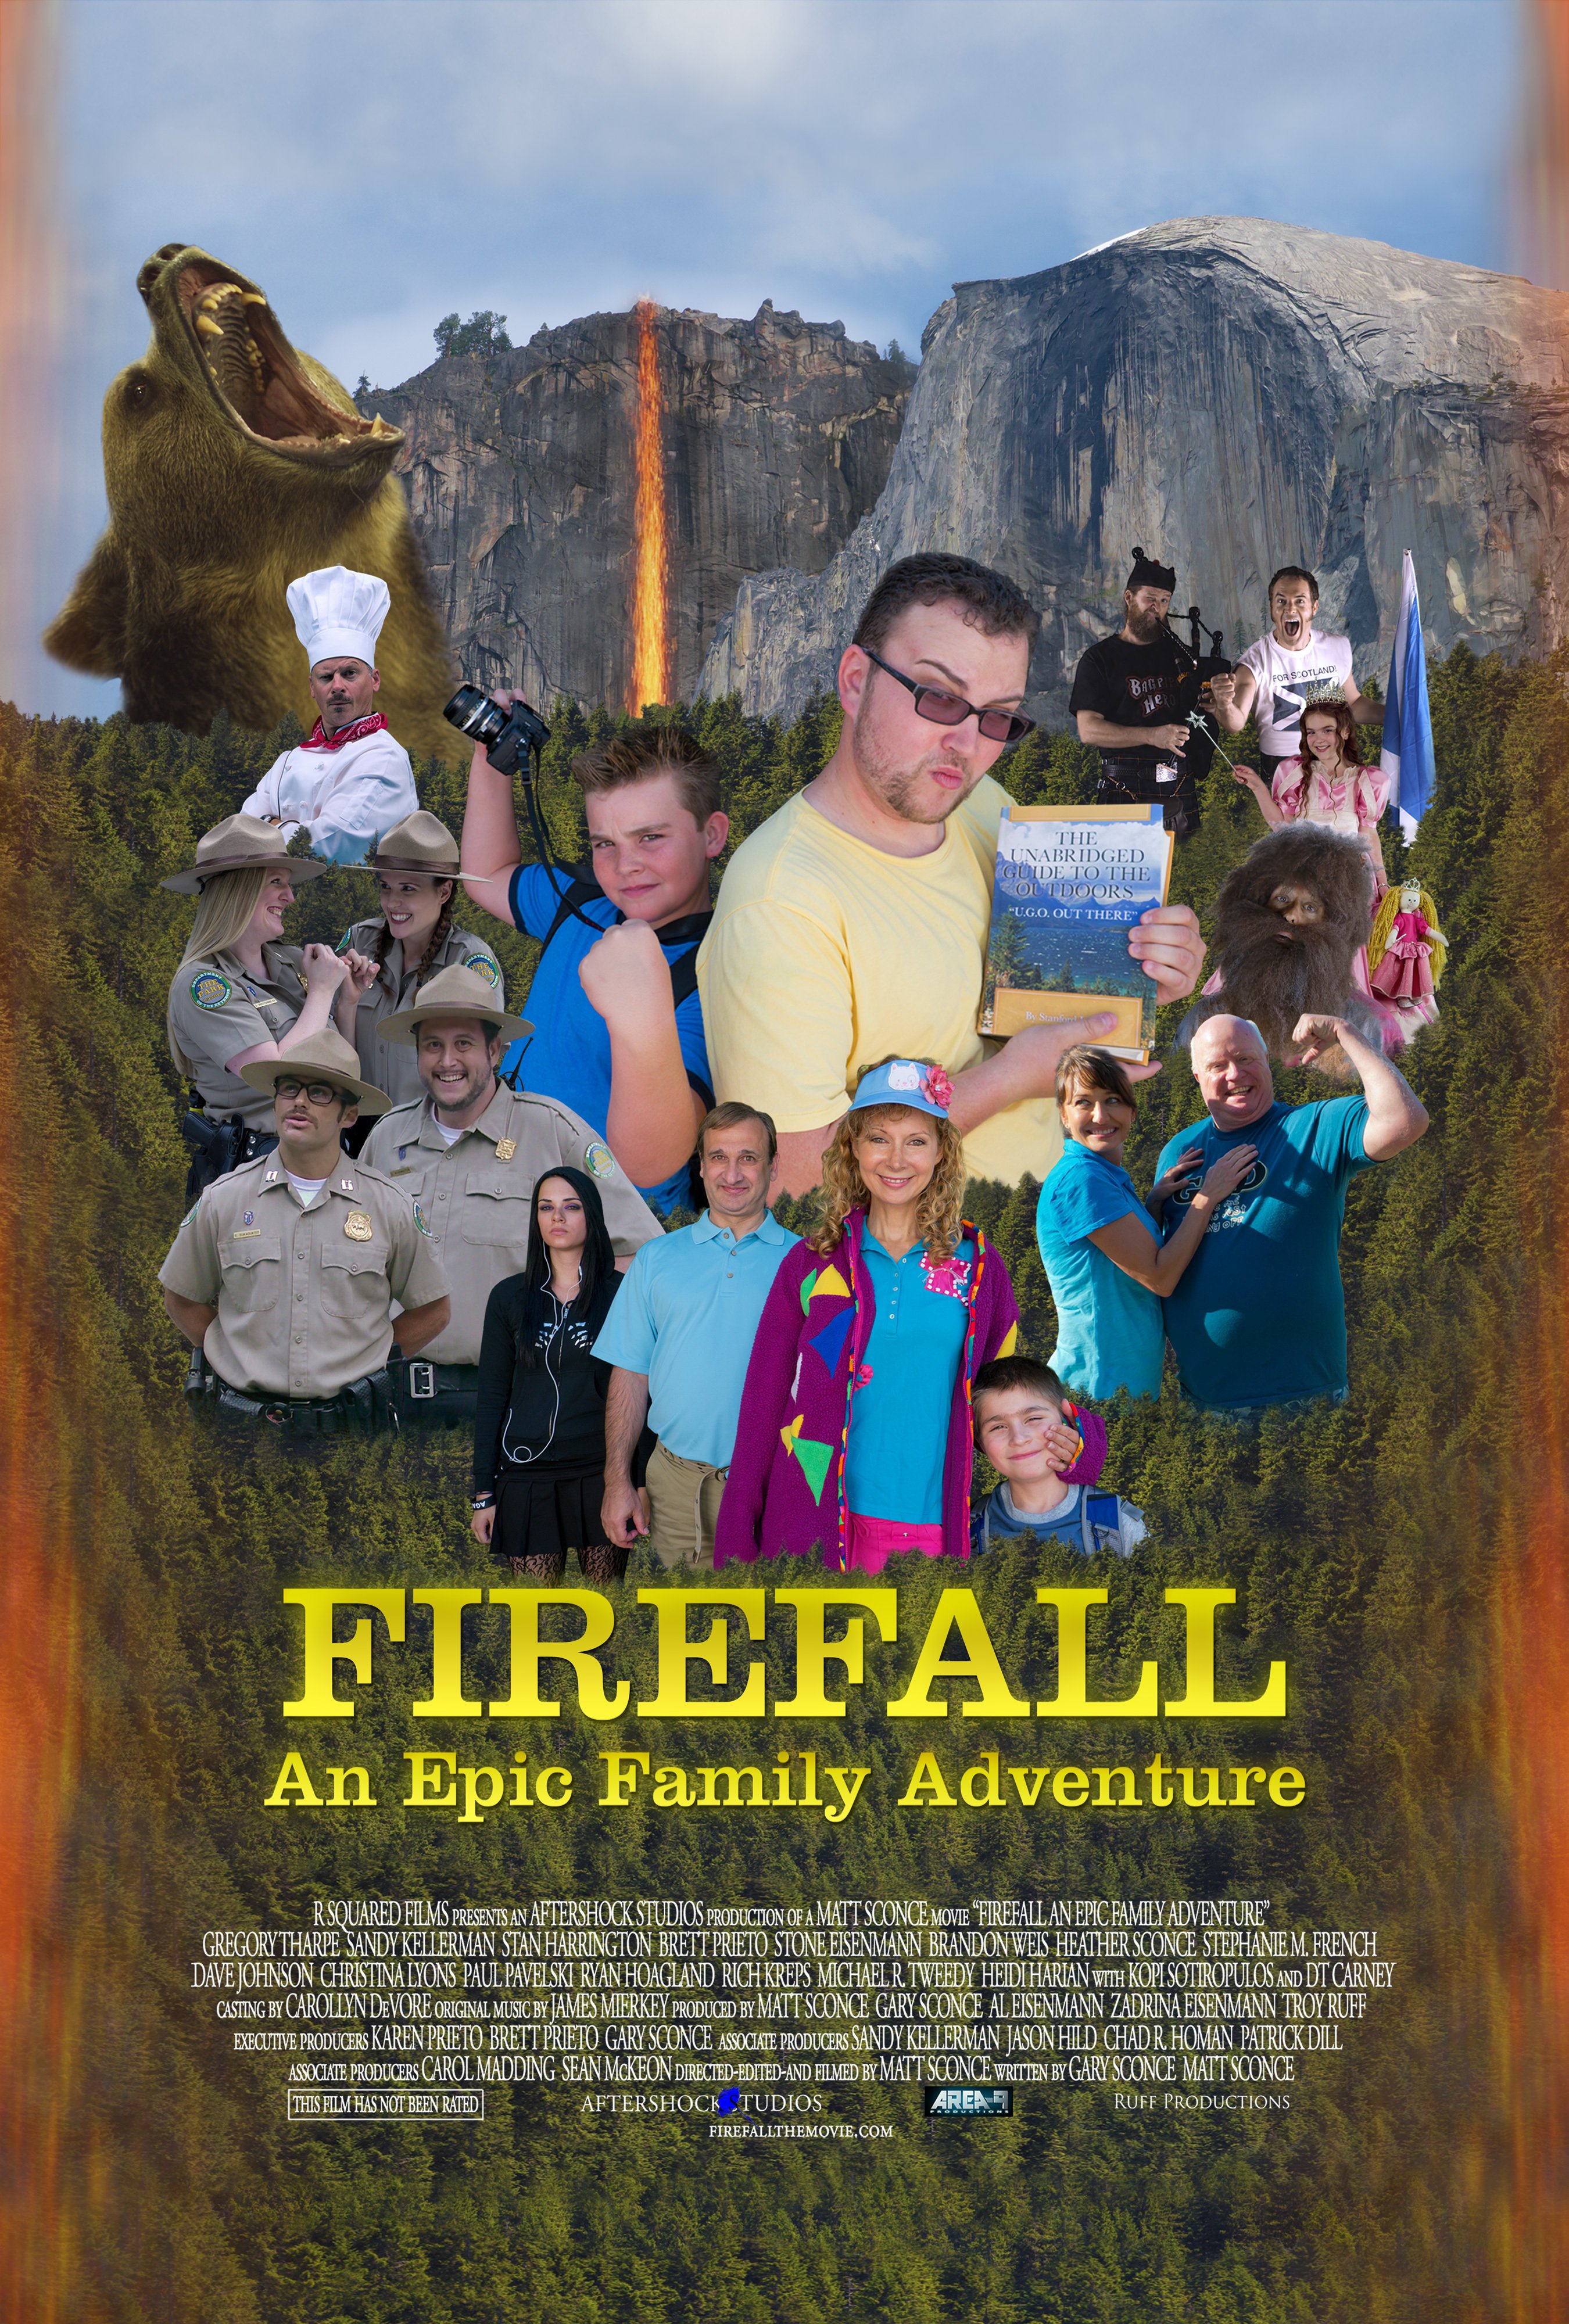  - firefall-an-epic-family-adventure-659958l